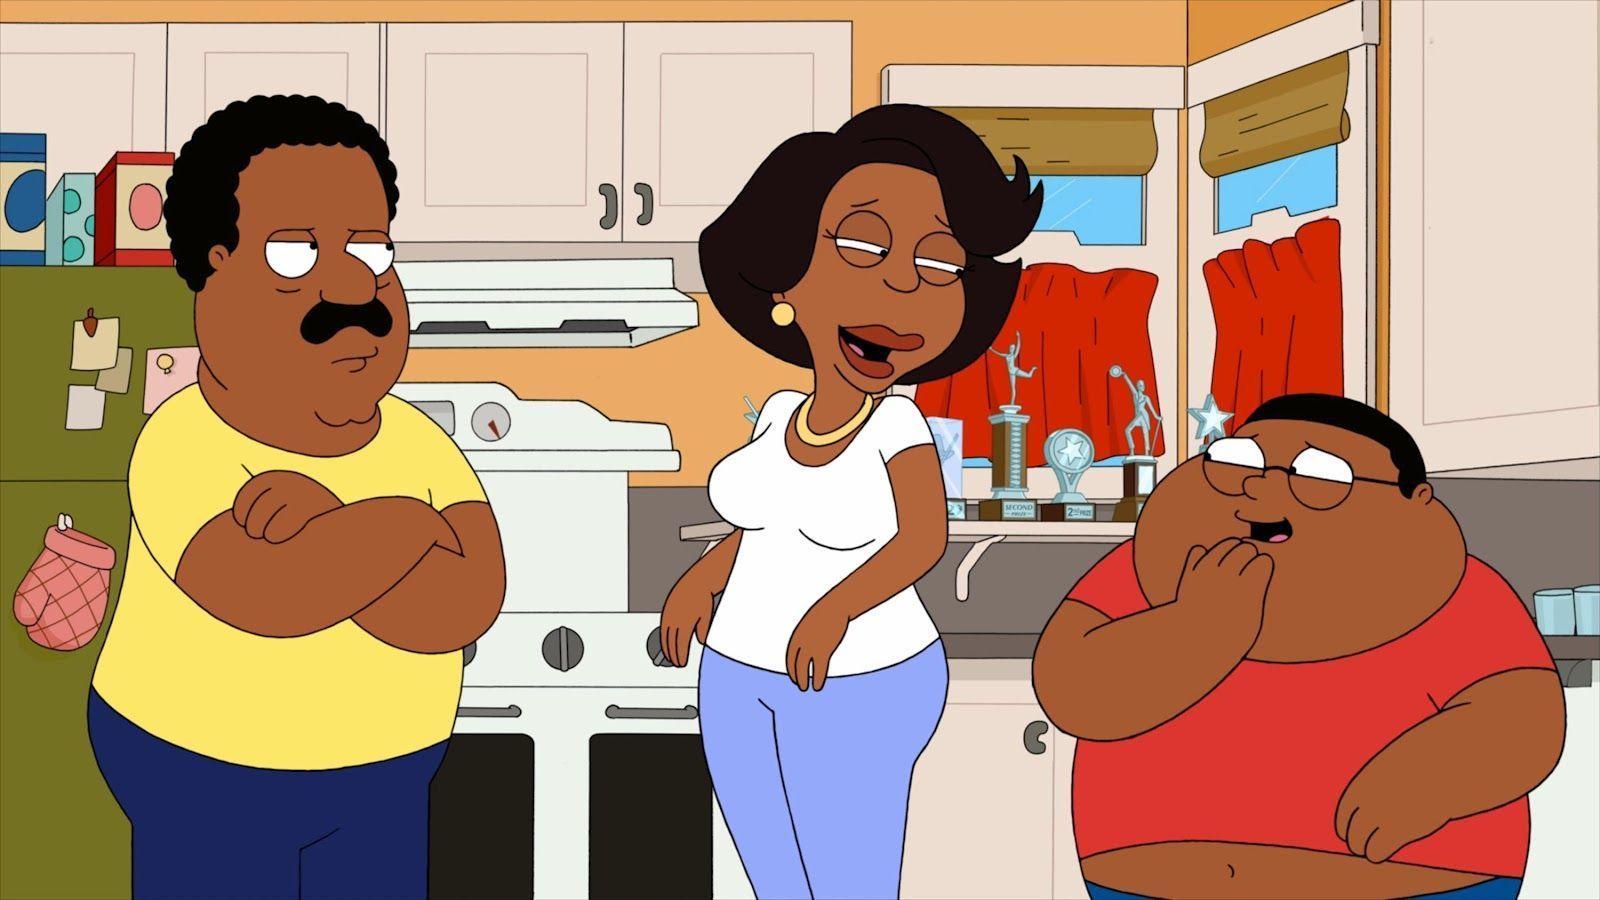 Fox Passes on New Episodes of "The Cleveland Show" Media